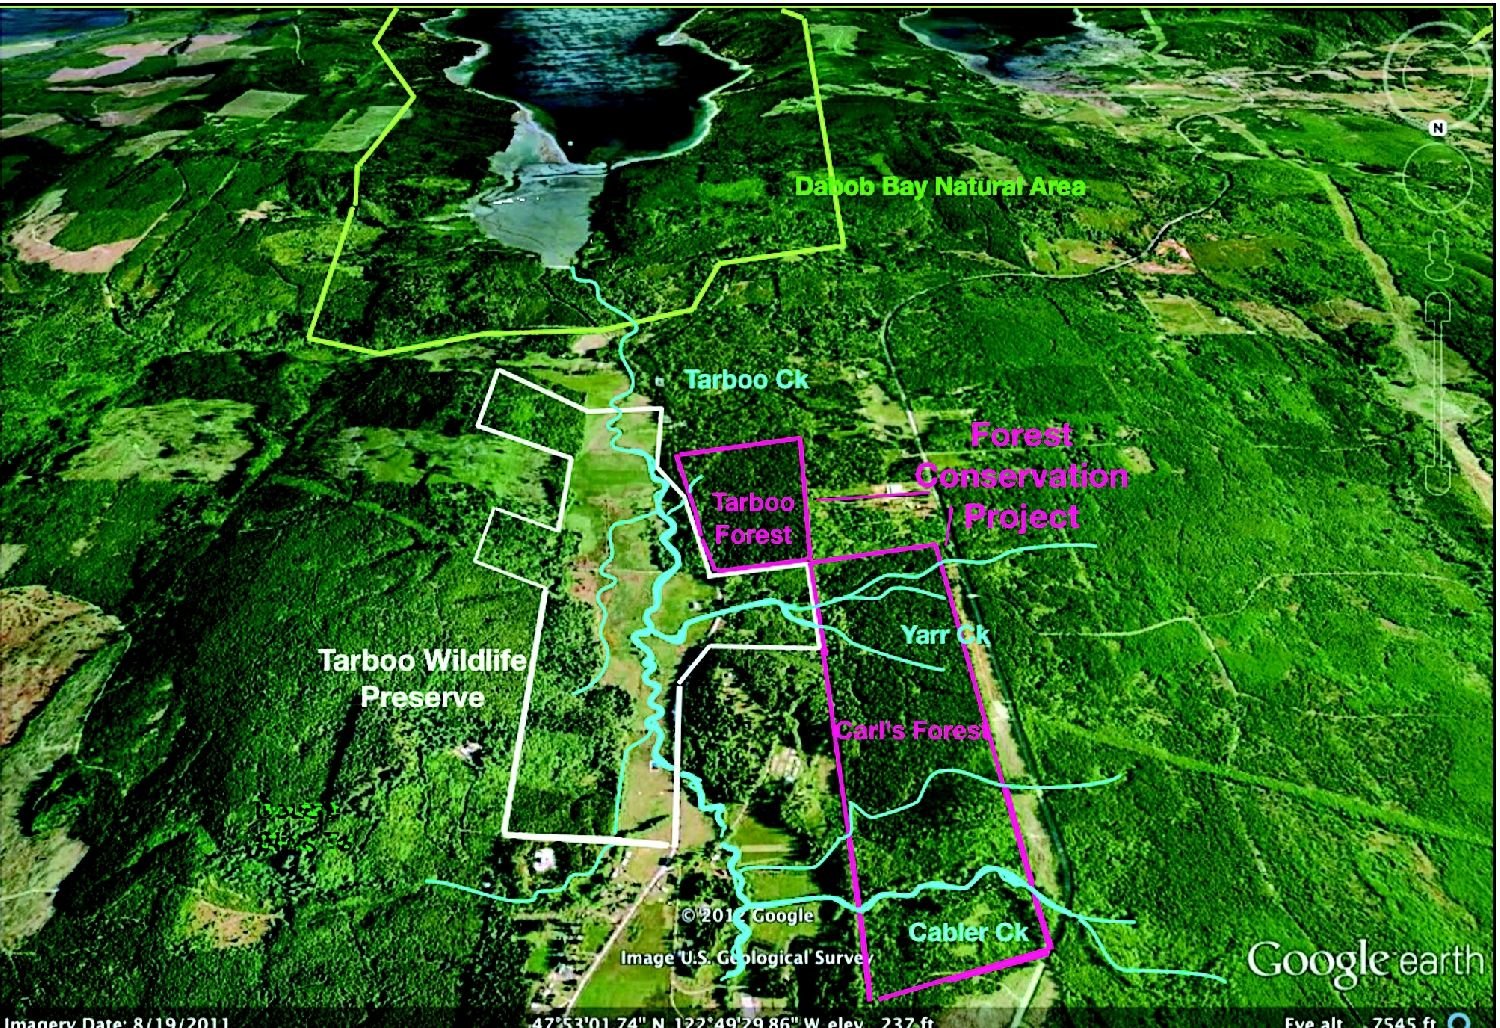 Map of the Tarboo Valley along Dabob Road showing Tarboo forestland owned by Northwest Watershed Institute, and Carl's Forest, owned by Leopold-Freeman Forests LLC, now protected under conservation easements, and adjacent to NWI's Tarboo Wildlife Preserve and Tarboo Creek.